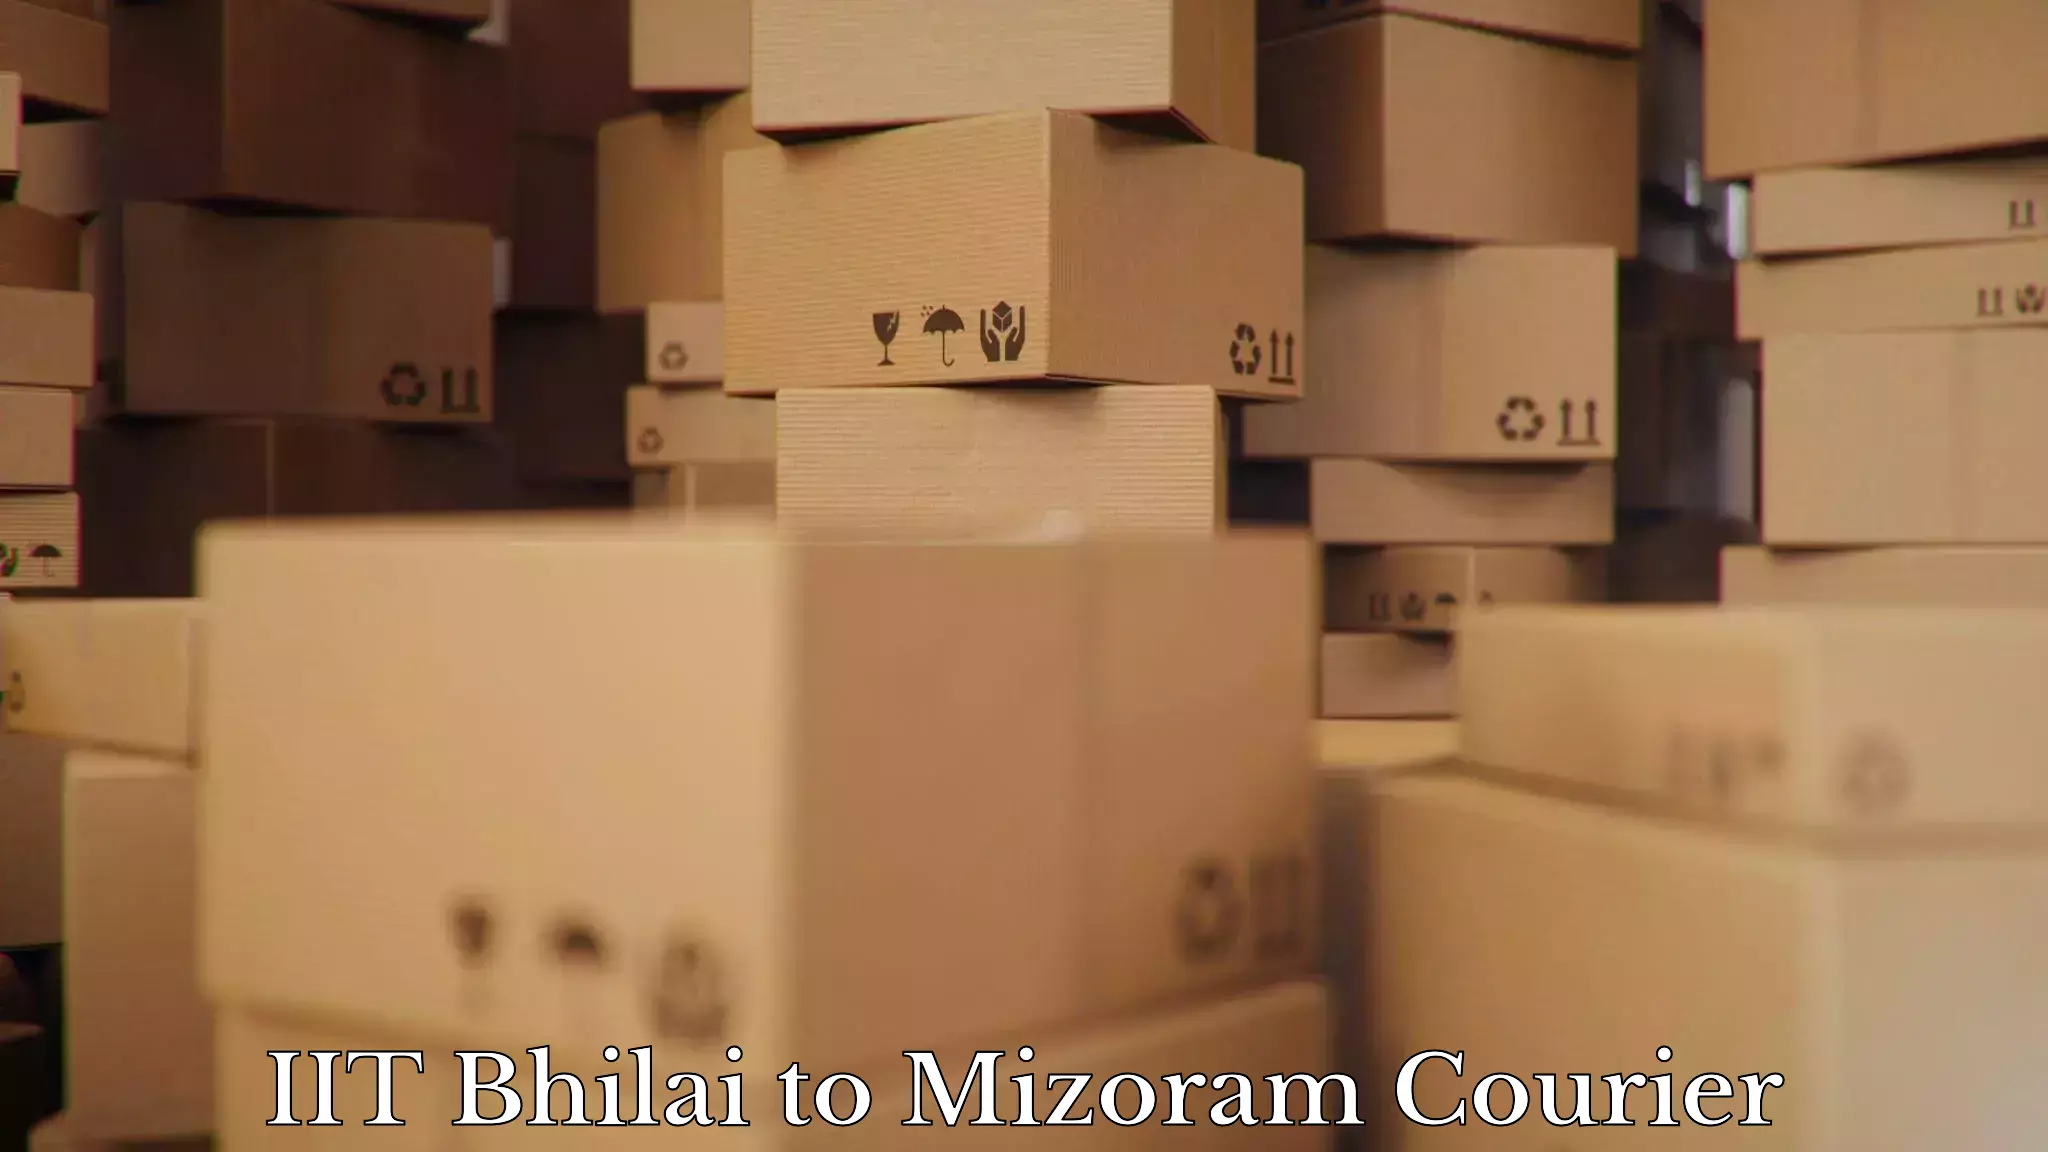 Moving service excellence IIT Bhilai to Mizoram